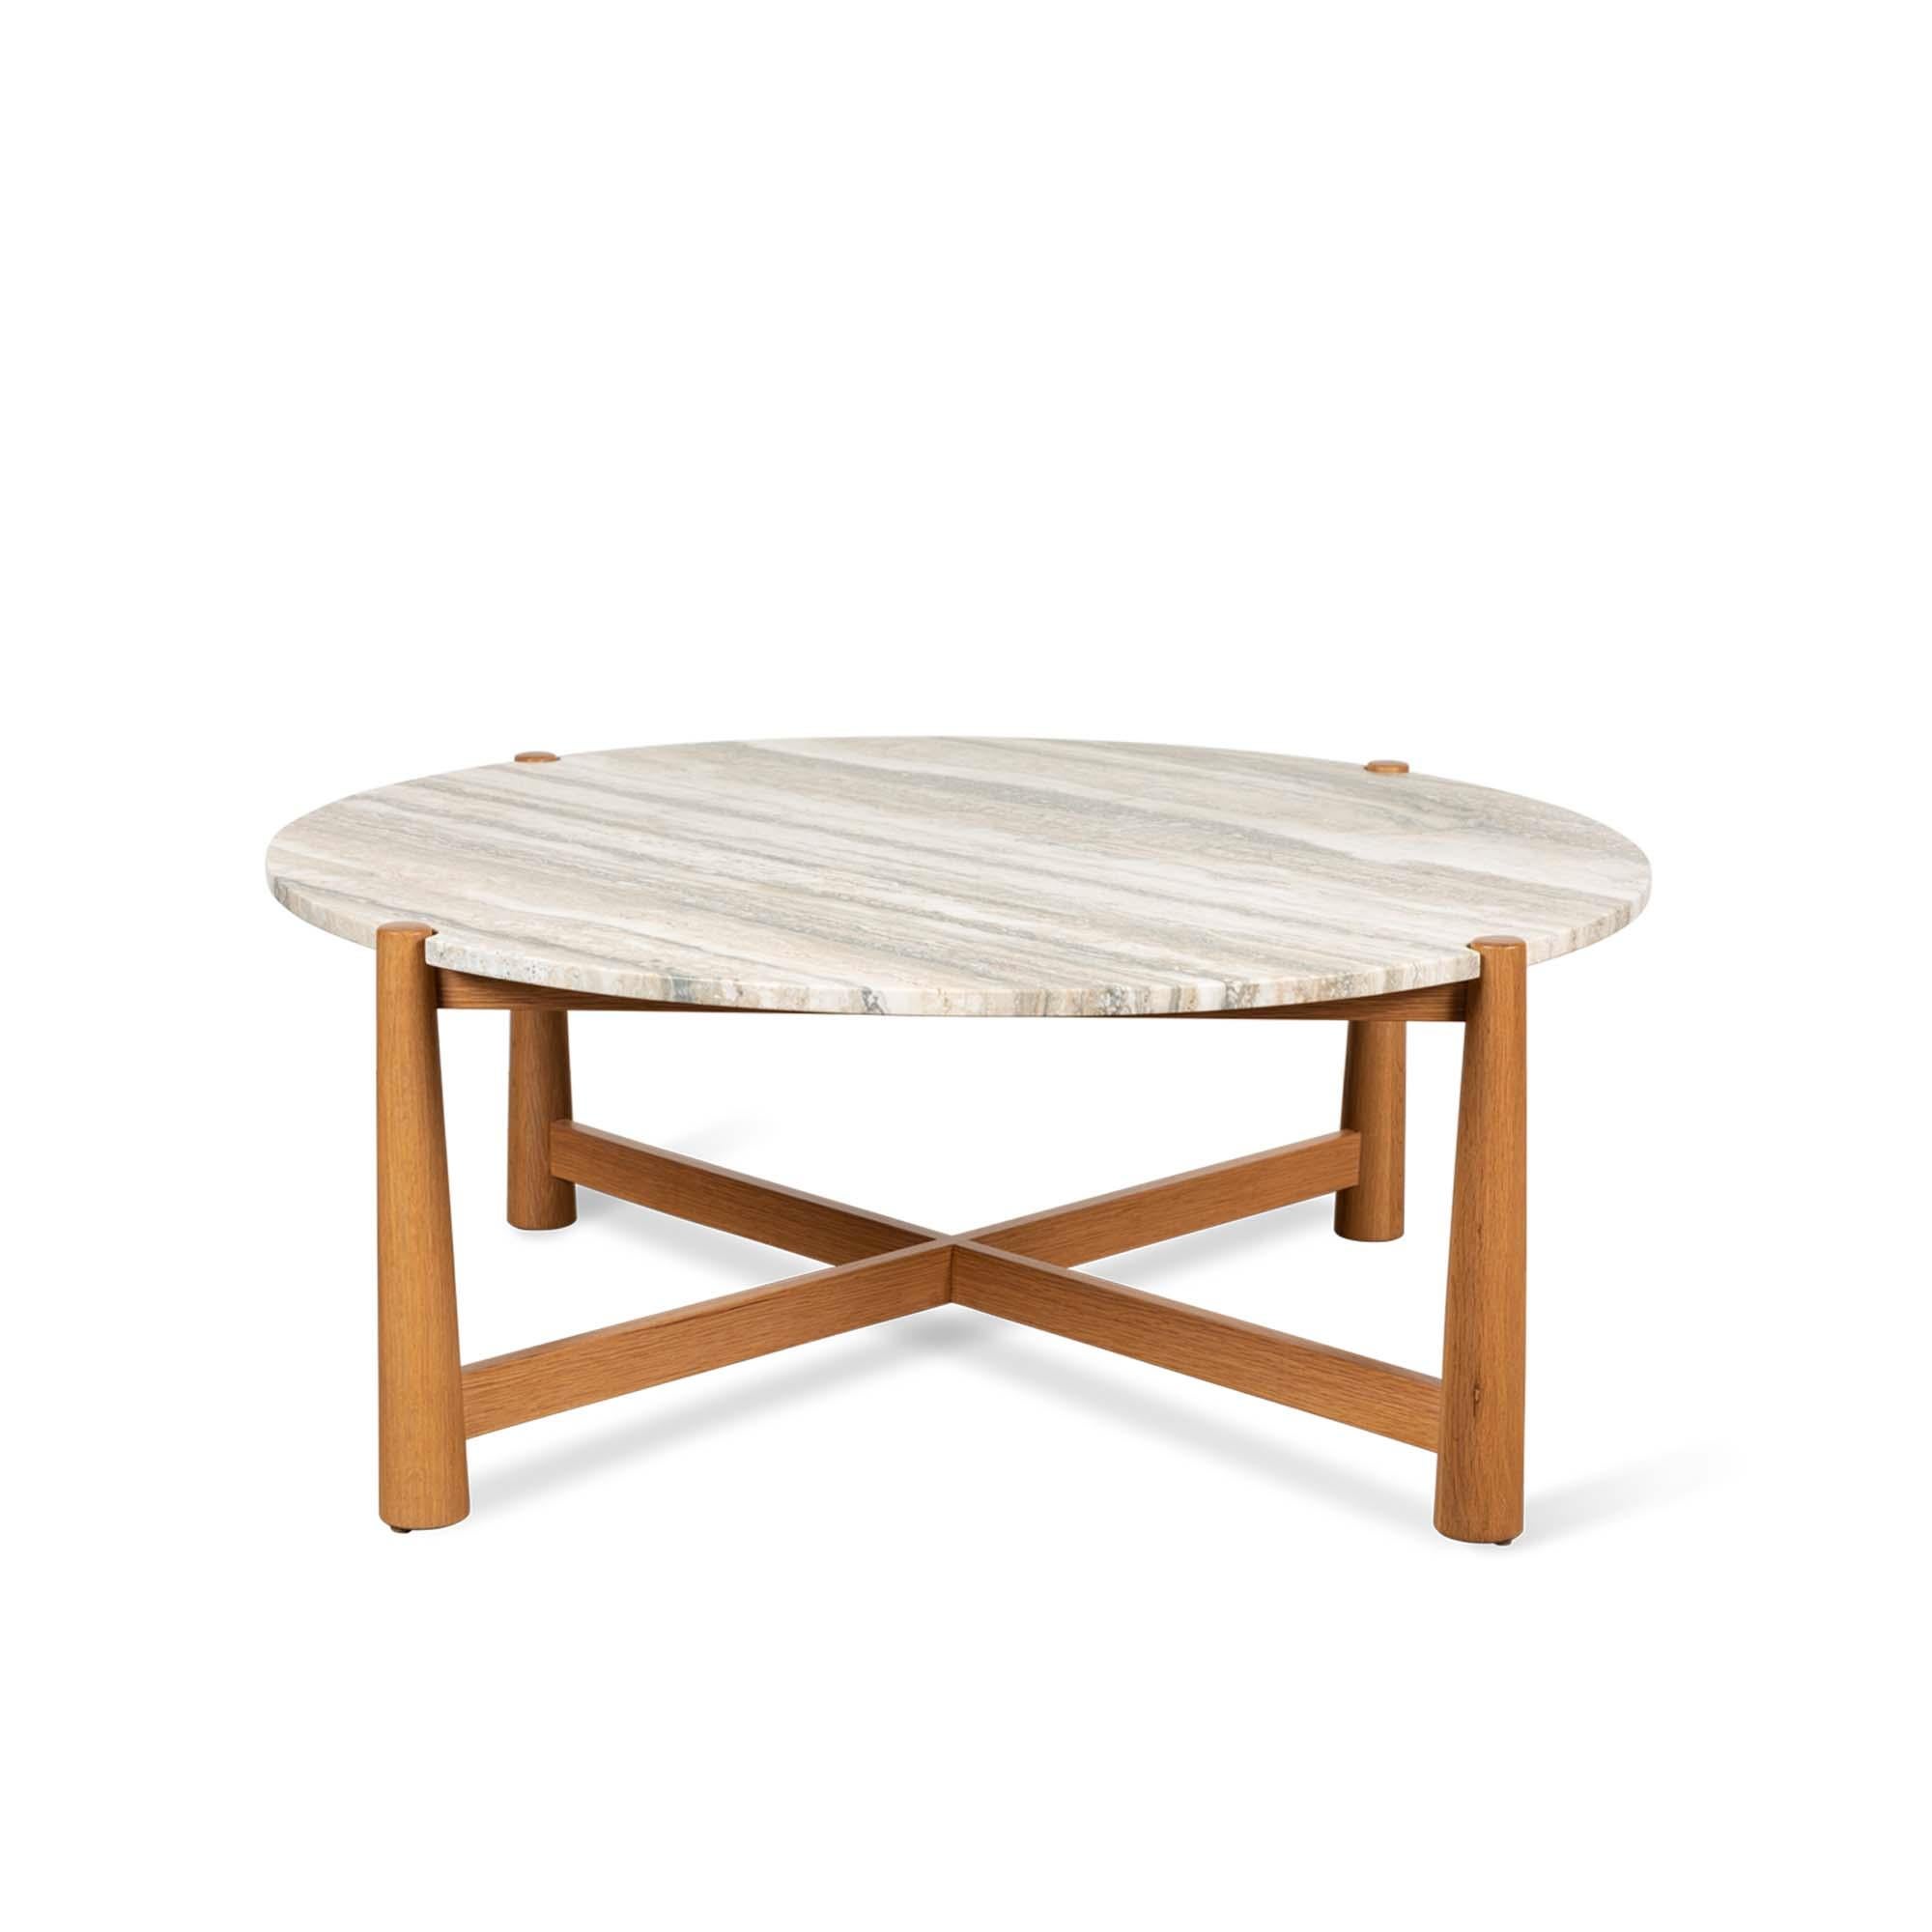 Travertine and oak round Bronson coffee table by Lawson-Fenning. The Bronson coffee table features a stone top with notched corners that rests atop a detailed American walnut or white oak base.
Measure: 42